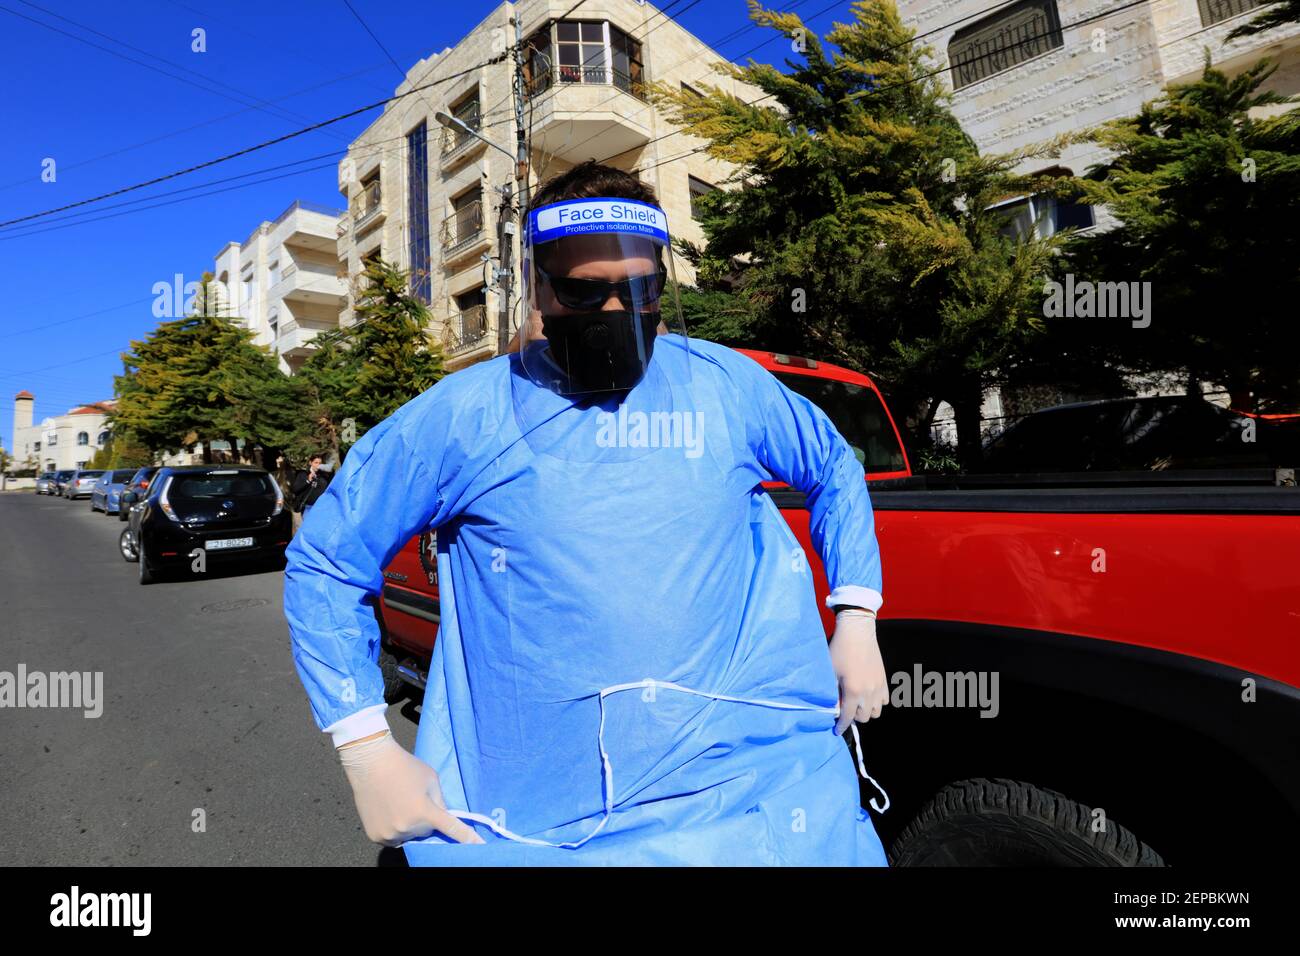 210227) -- AMMAN, Feb. 27, (Xinhua) -- A health worker prepares to collect samples for COVID-19 tests in Amman, Jordan, Feb. 26, 2021. Jordan on Wednesday to reinstate curfew on